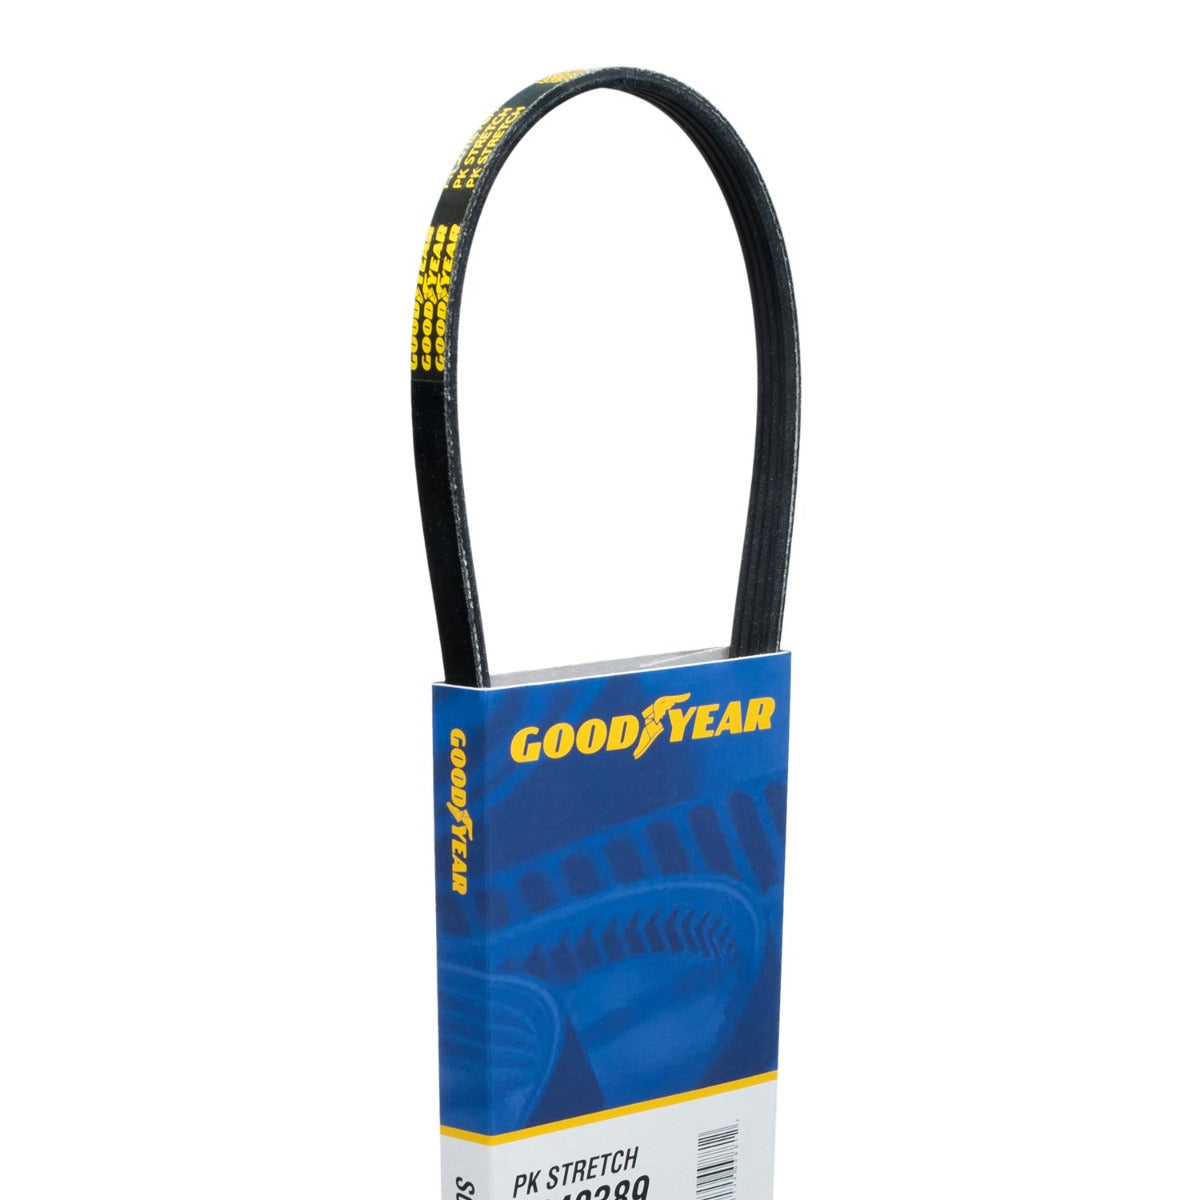 4 Ribs 30.9 Effective Length Stretch to Fit Multi VBelt PK Goodyear S040245